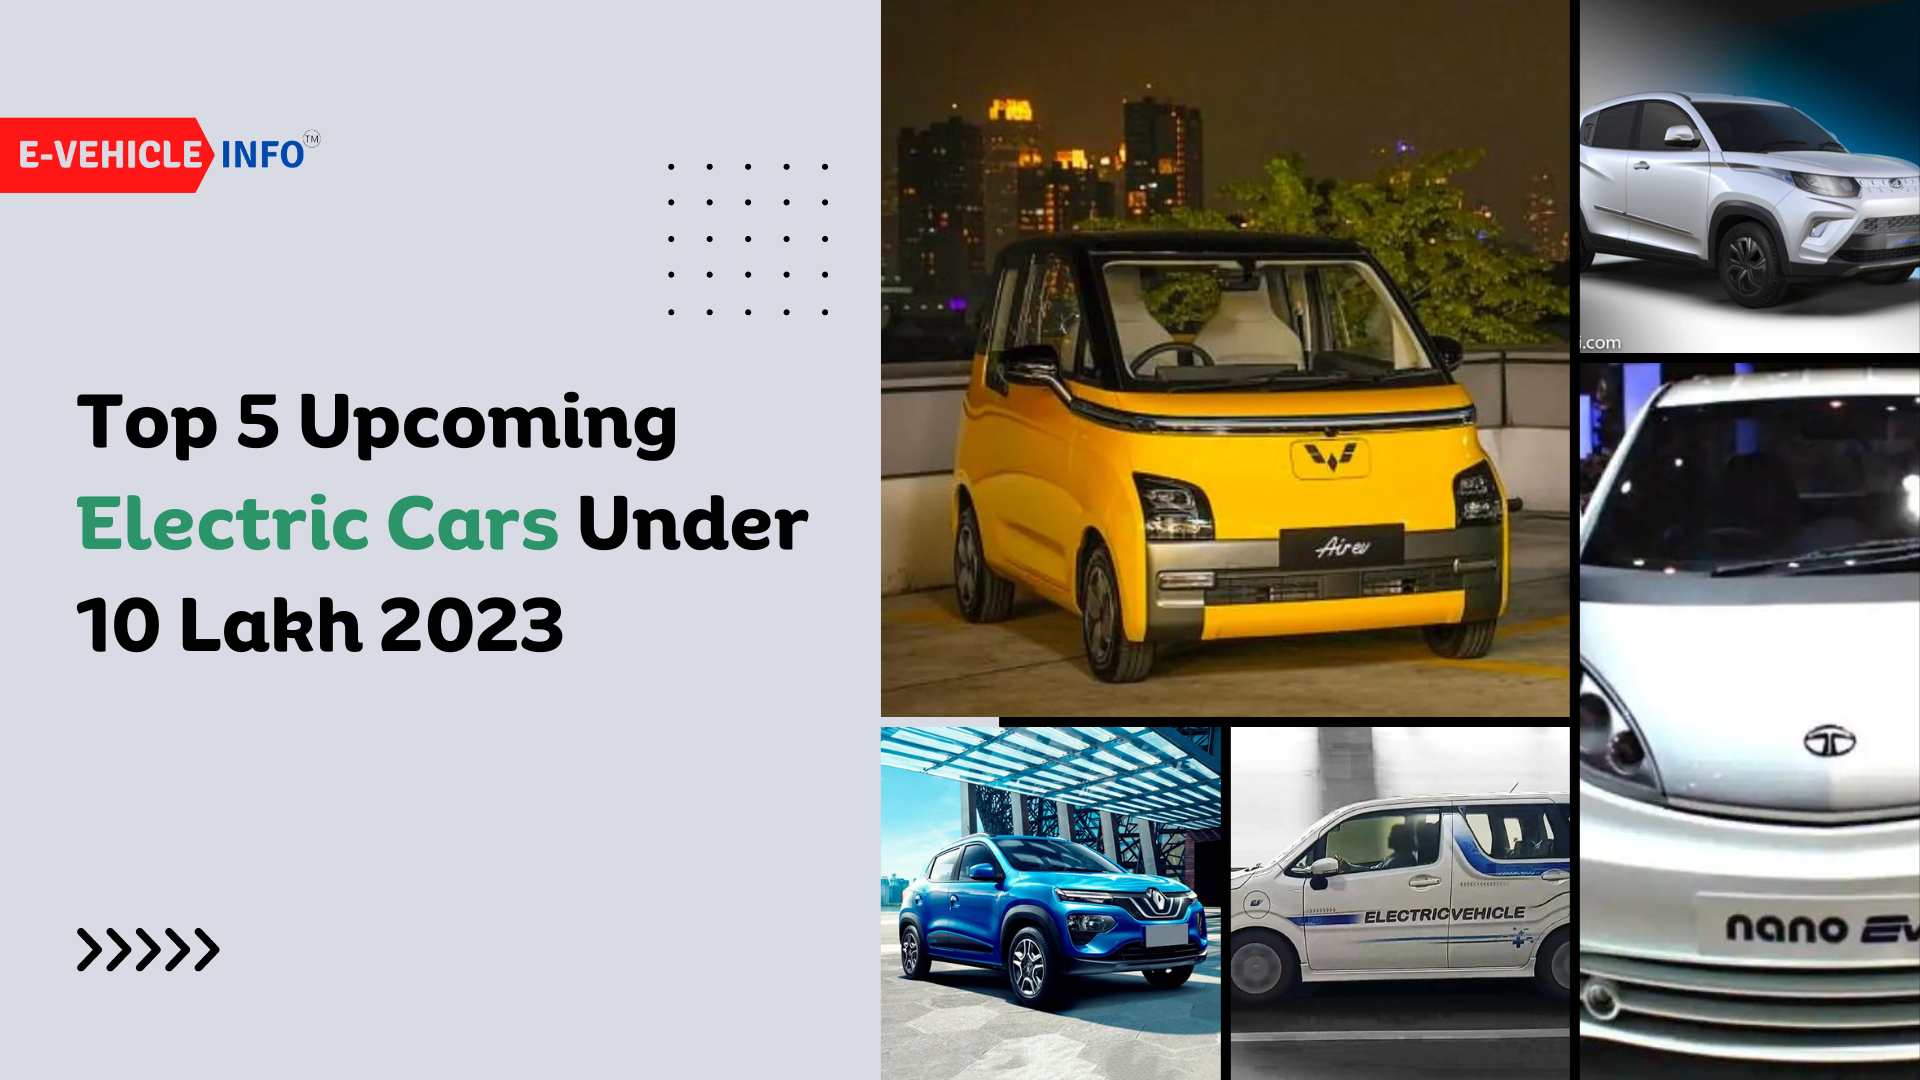 https://e-vehicleinfo.com/top-5-upcoming-electric-cars-under-10-lakh-in-india-2023/